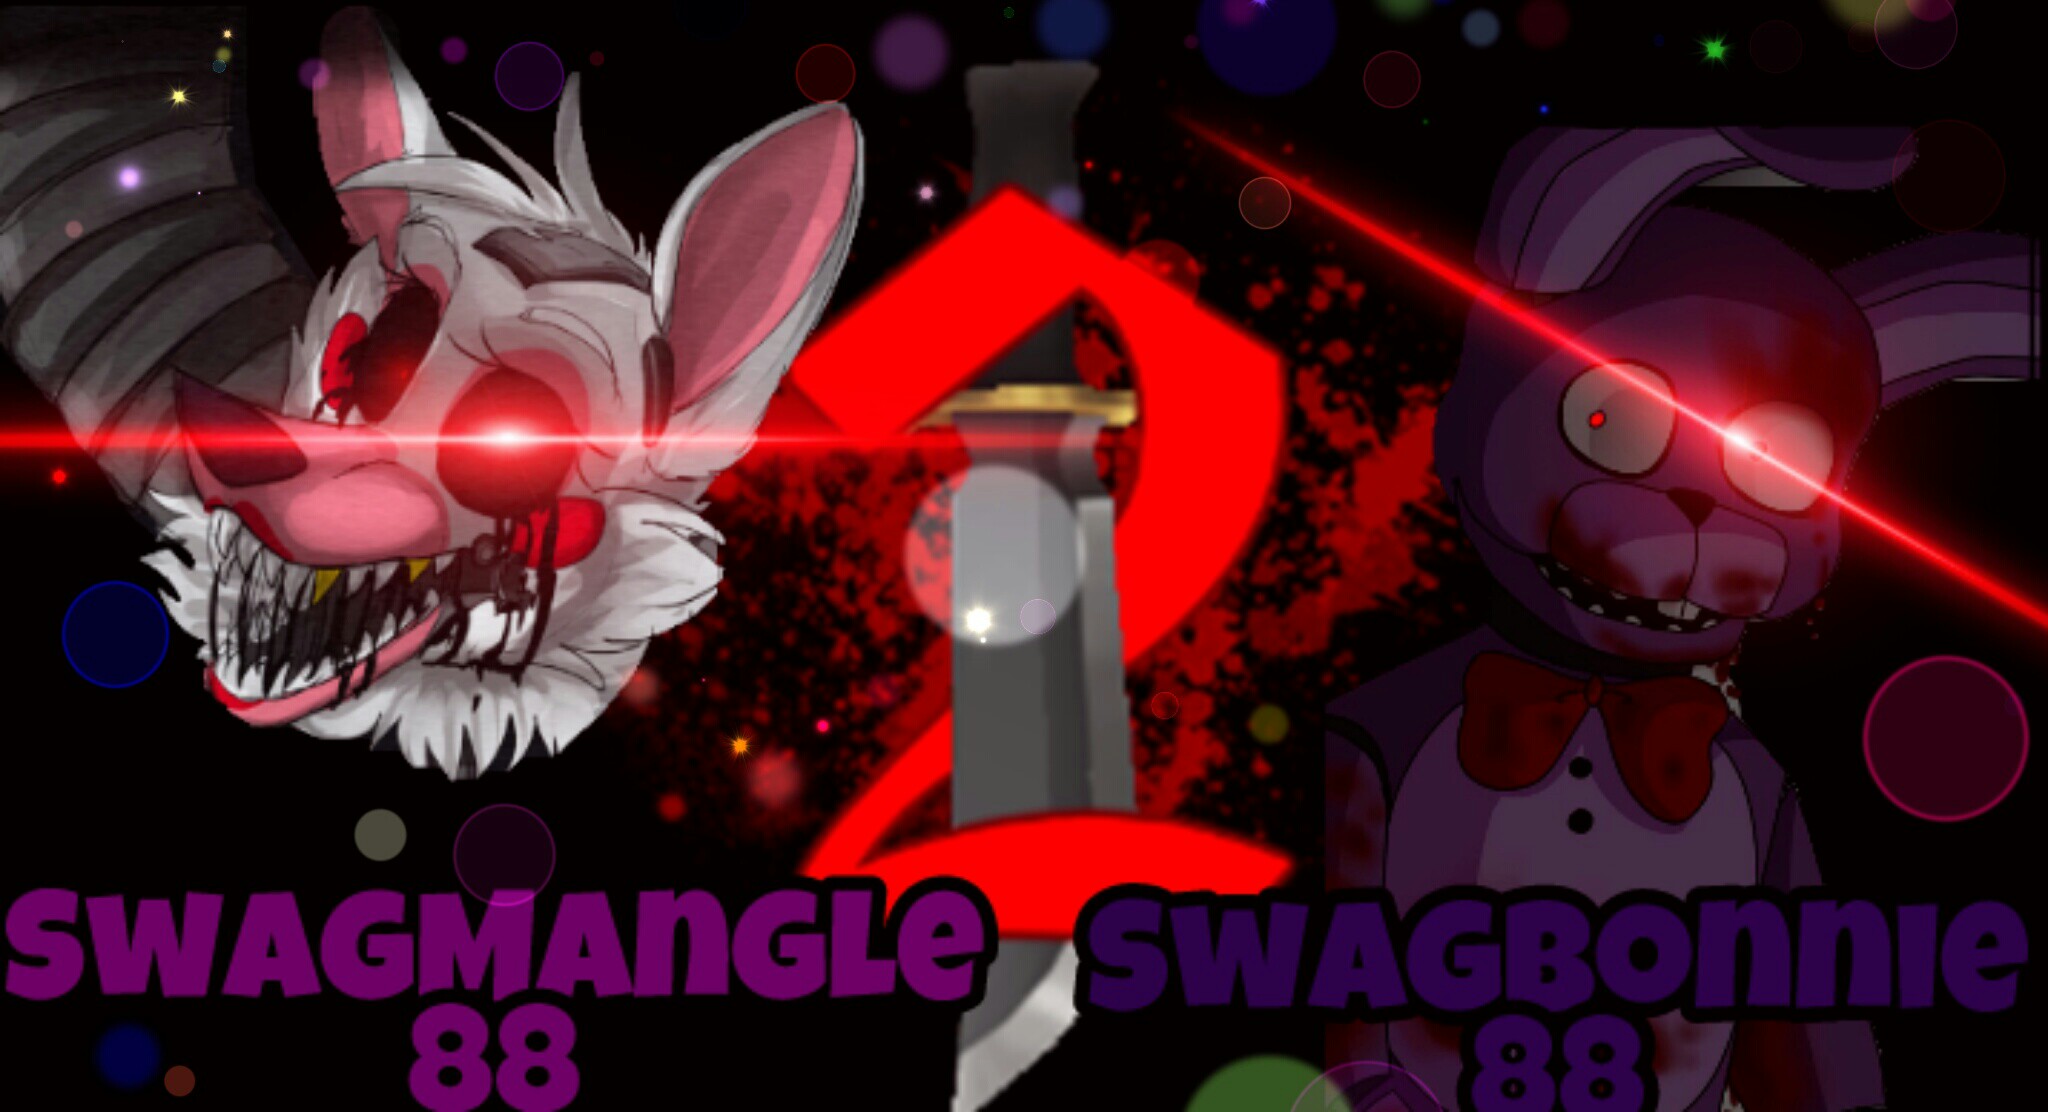 New Yt Thumbnail For A Roblox Image By Xshadowwolf18 - mm2 thumbnail roblox